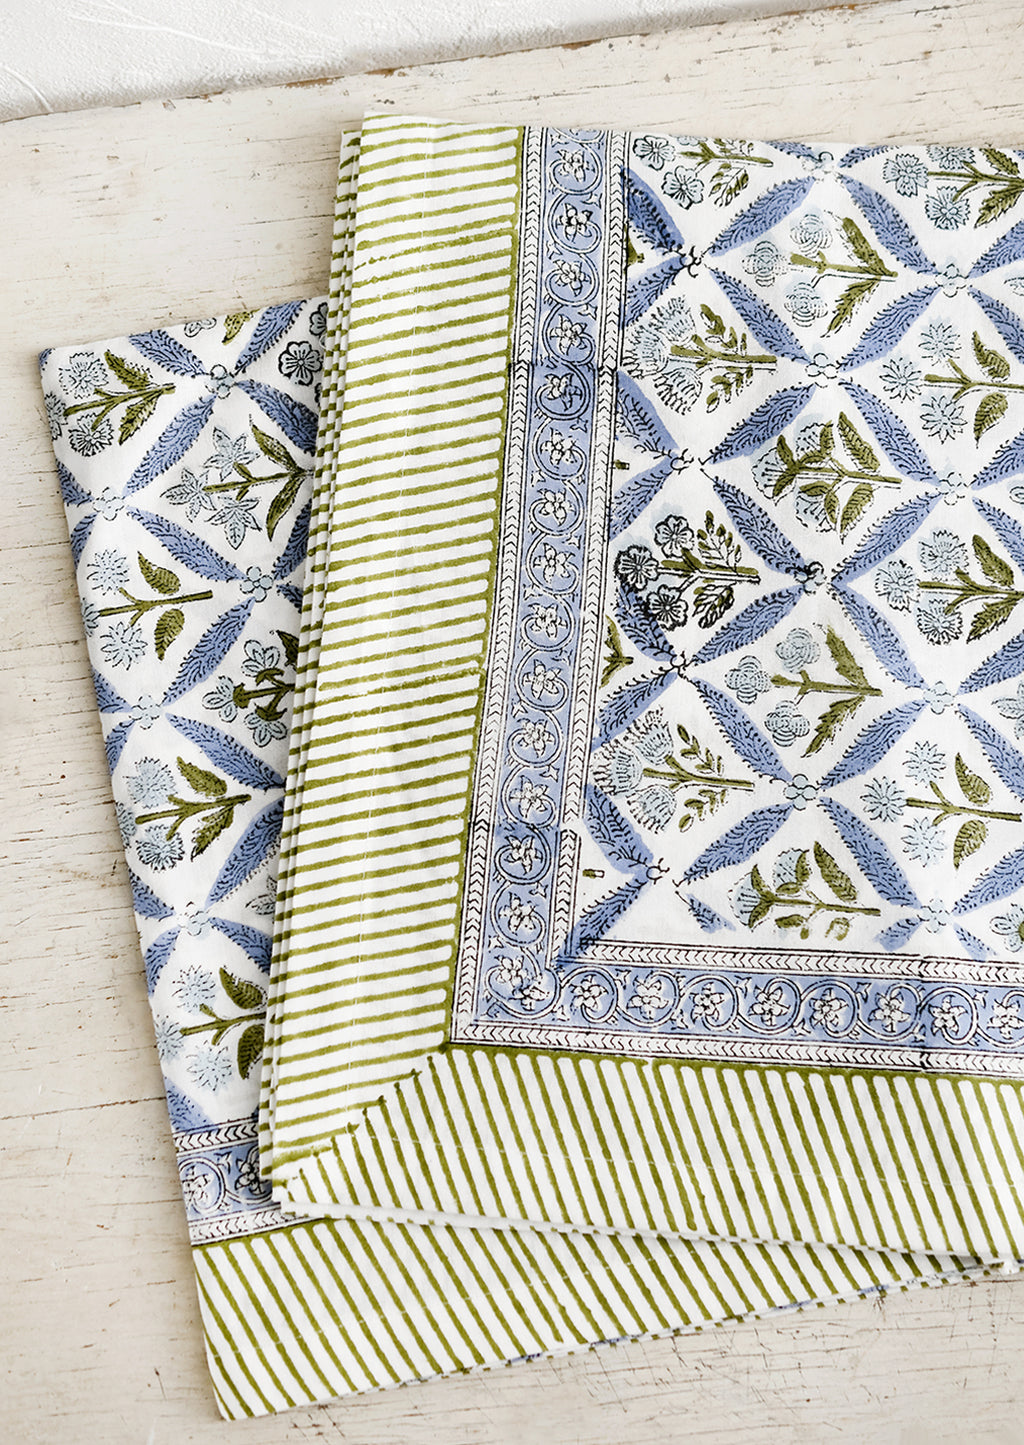 1: A block printed floral tablecloth in blue and green.